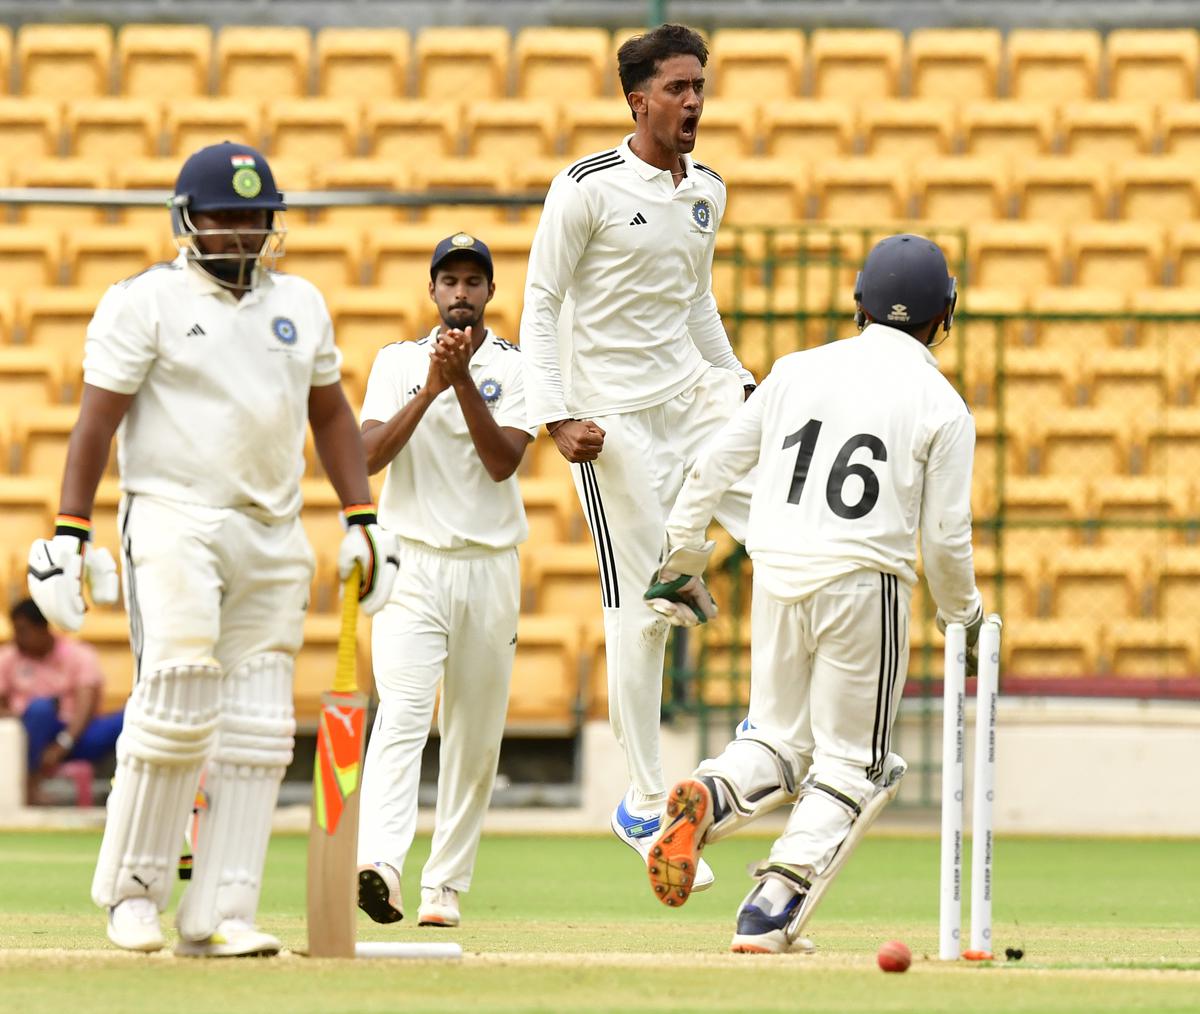 South Zone bowler Sai Kishore, second from right, celebrates his wicket during Duleep Trophy Final between West Zone and South Zone.